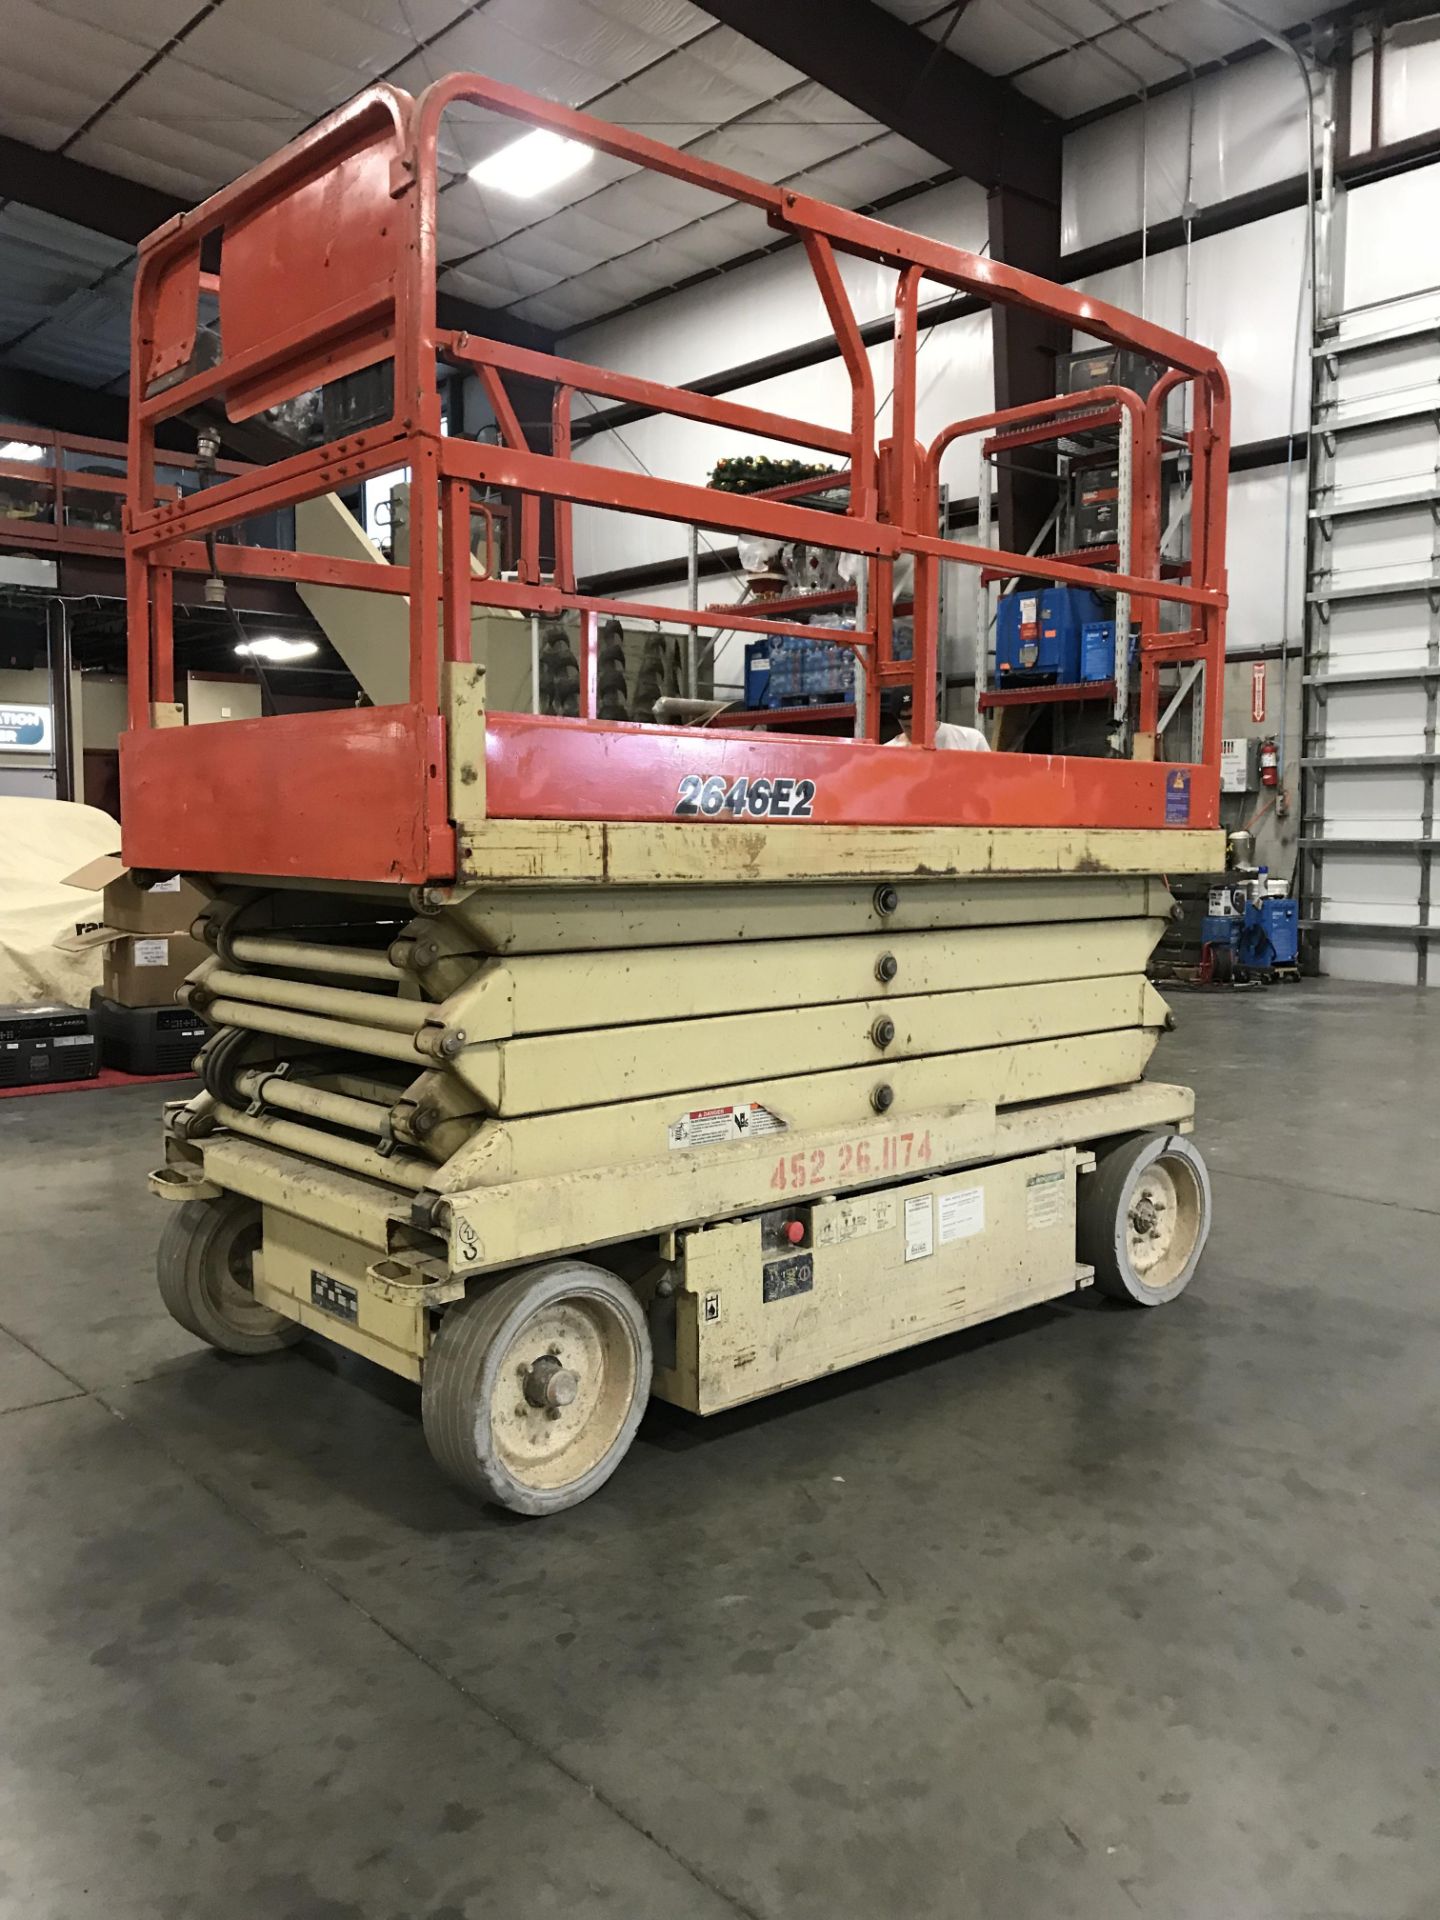 JLG 2646E2 ELECTRIC SCISSOR LIFT, BUILT IN BATTERY CHARGER, 483 HOURS SHOWING - Image 4 of 6